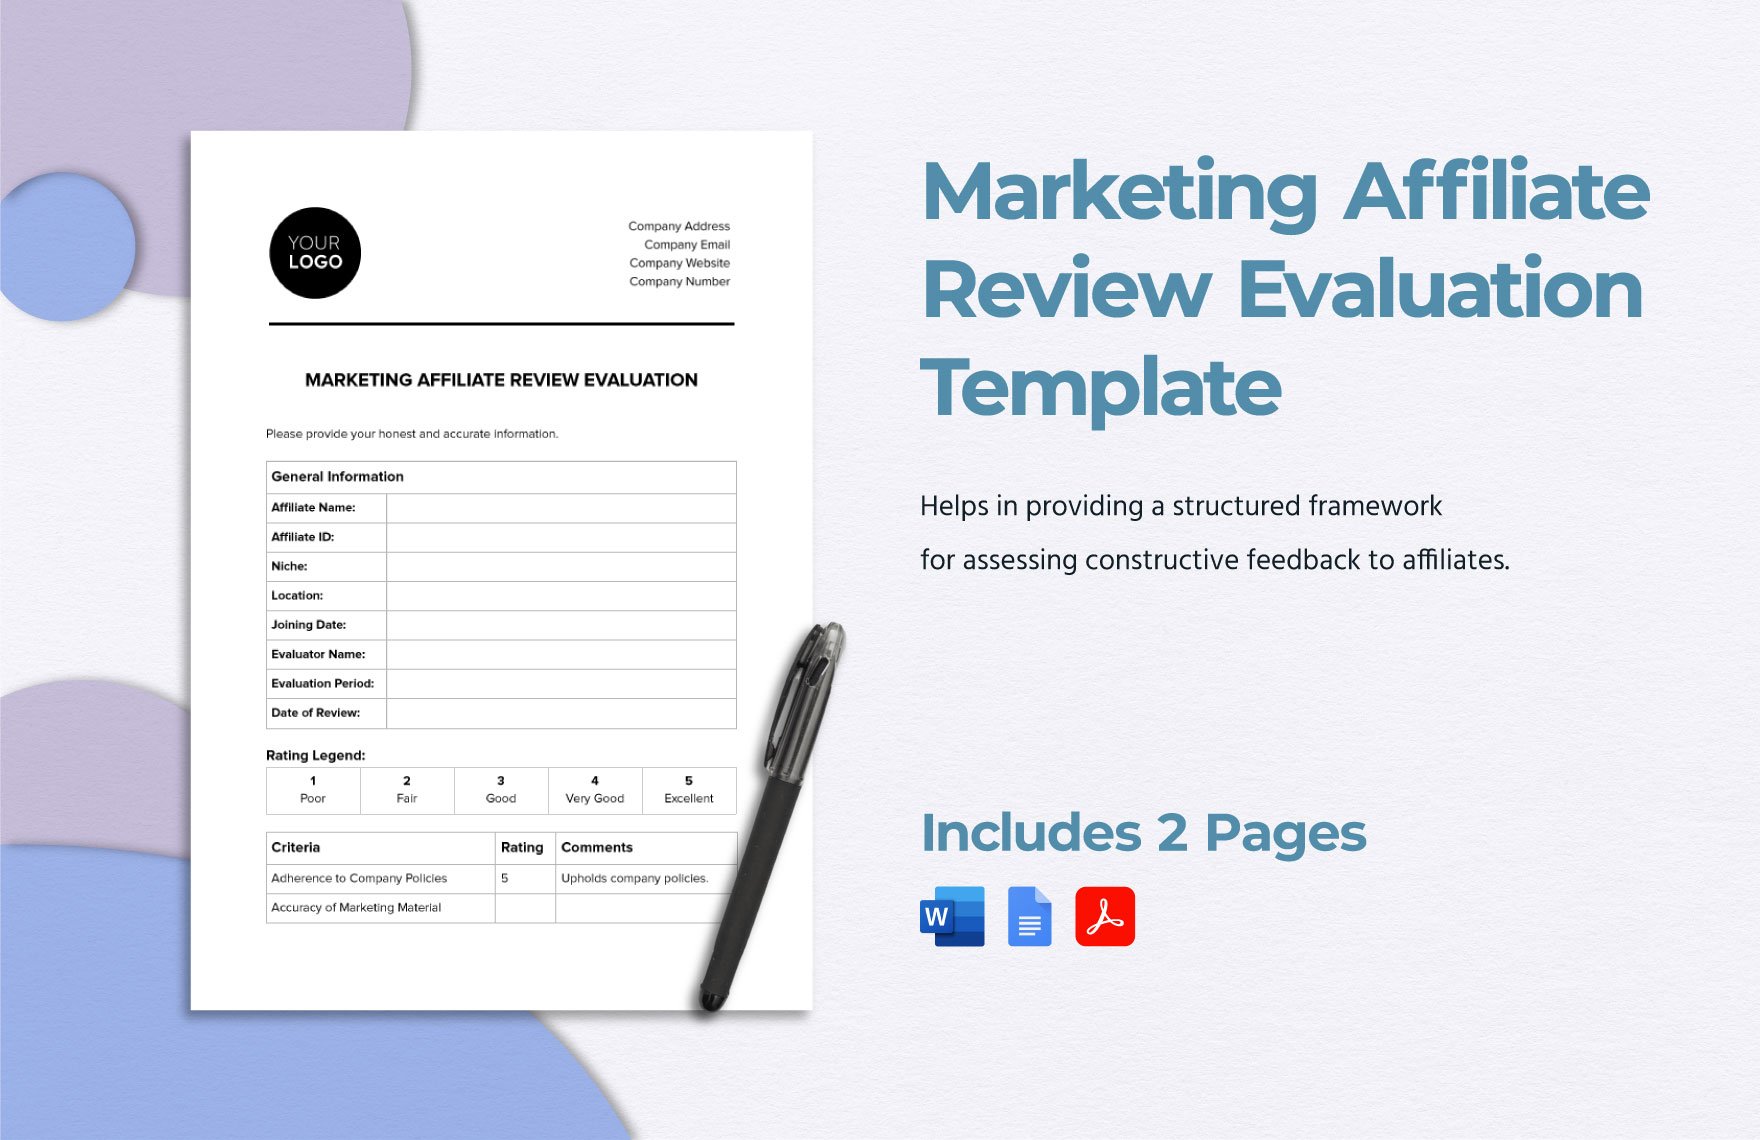 Marketing Affiliate Review Evaluation Template